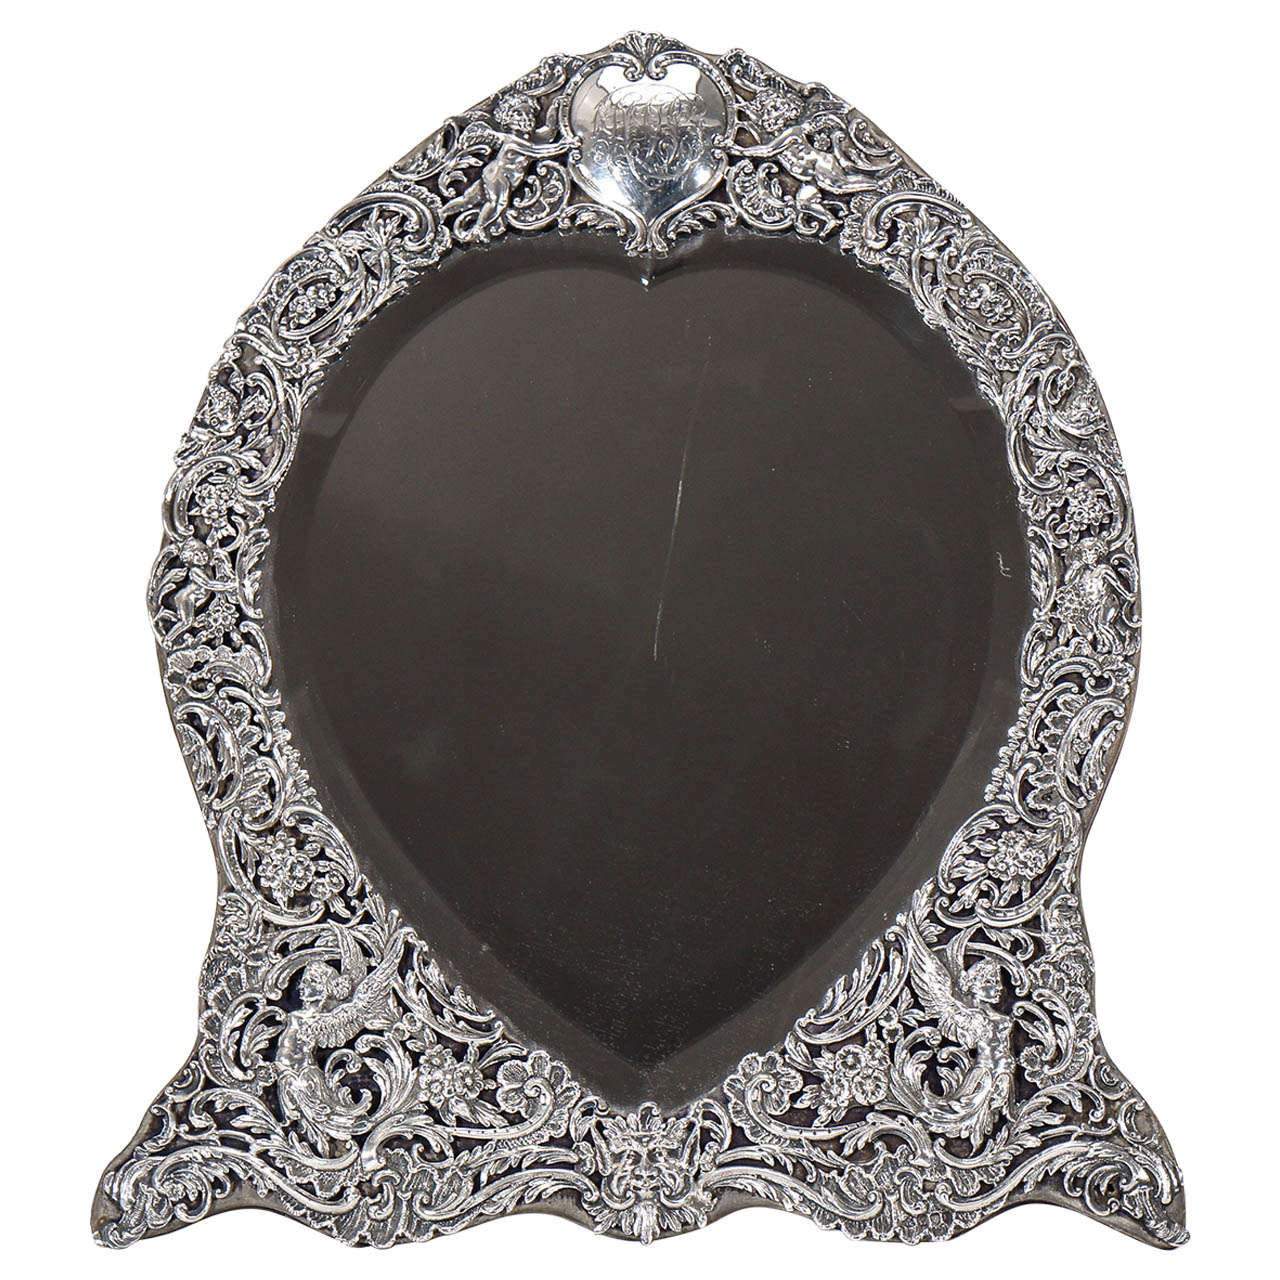 English 19th Century Sterling Silver Monumental Frame with Filigree Decoration on Velvet